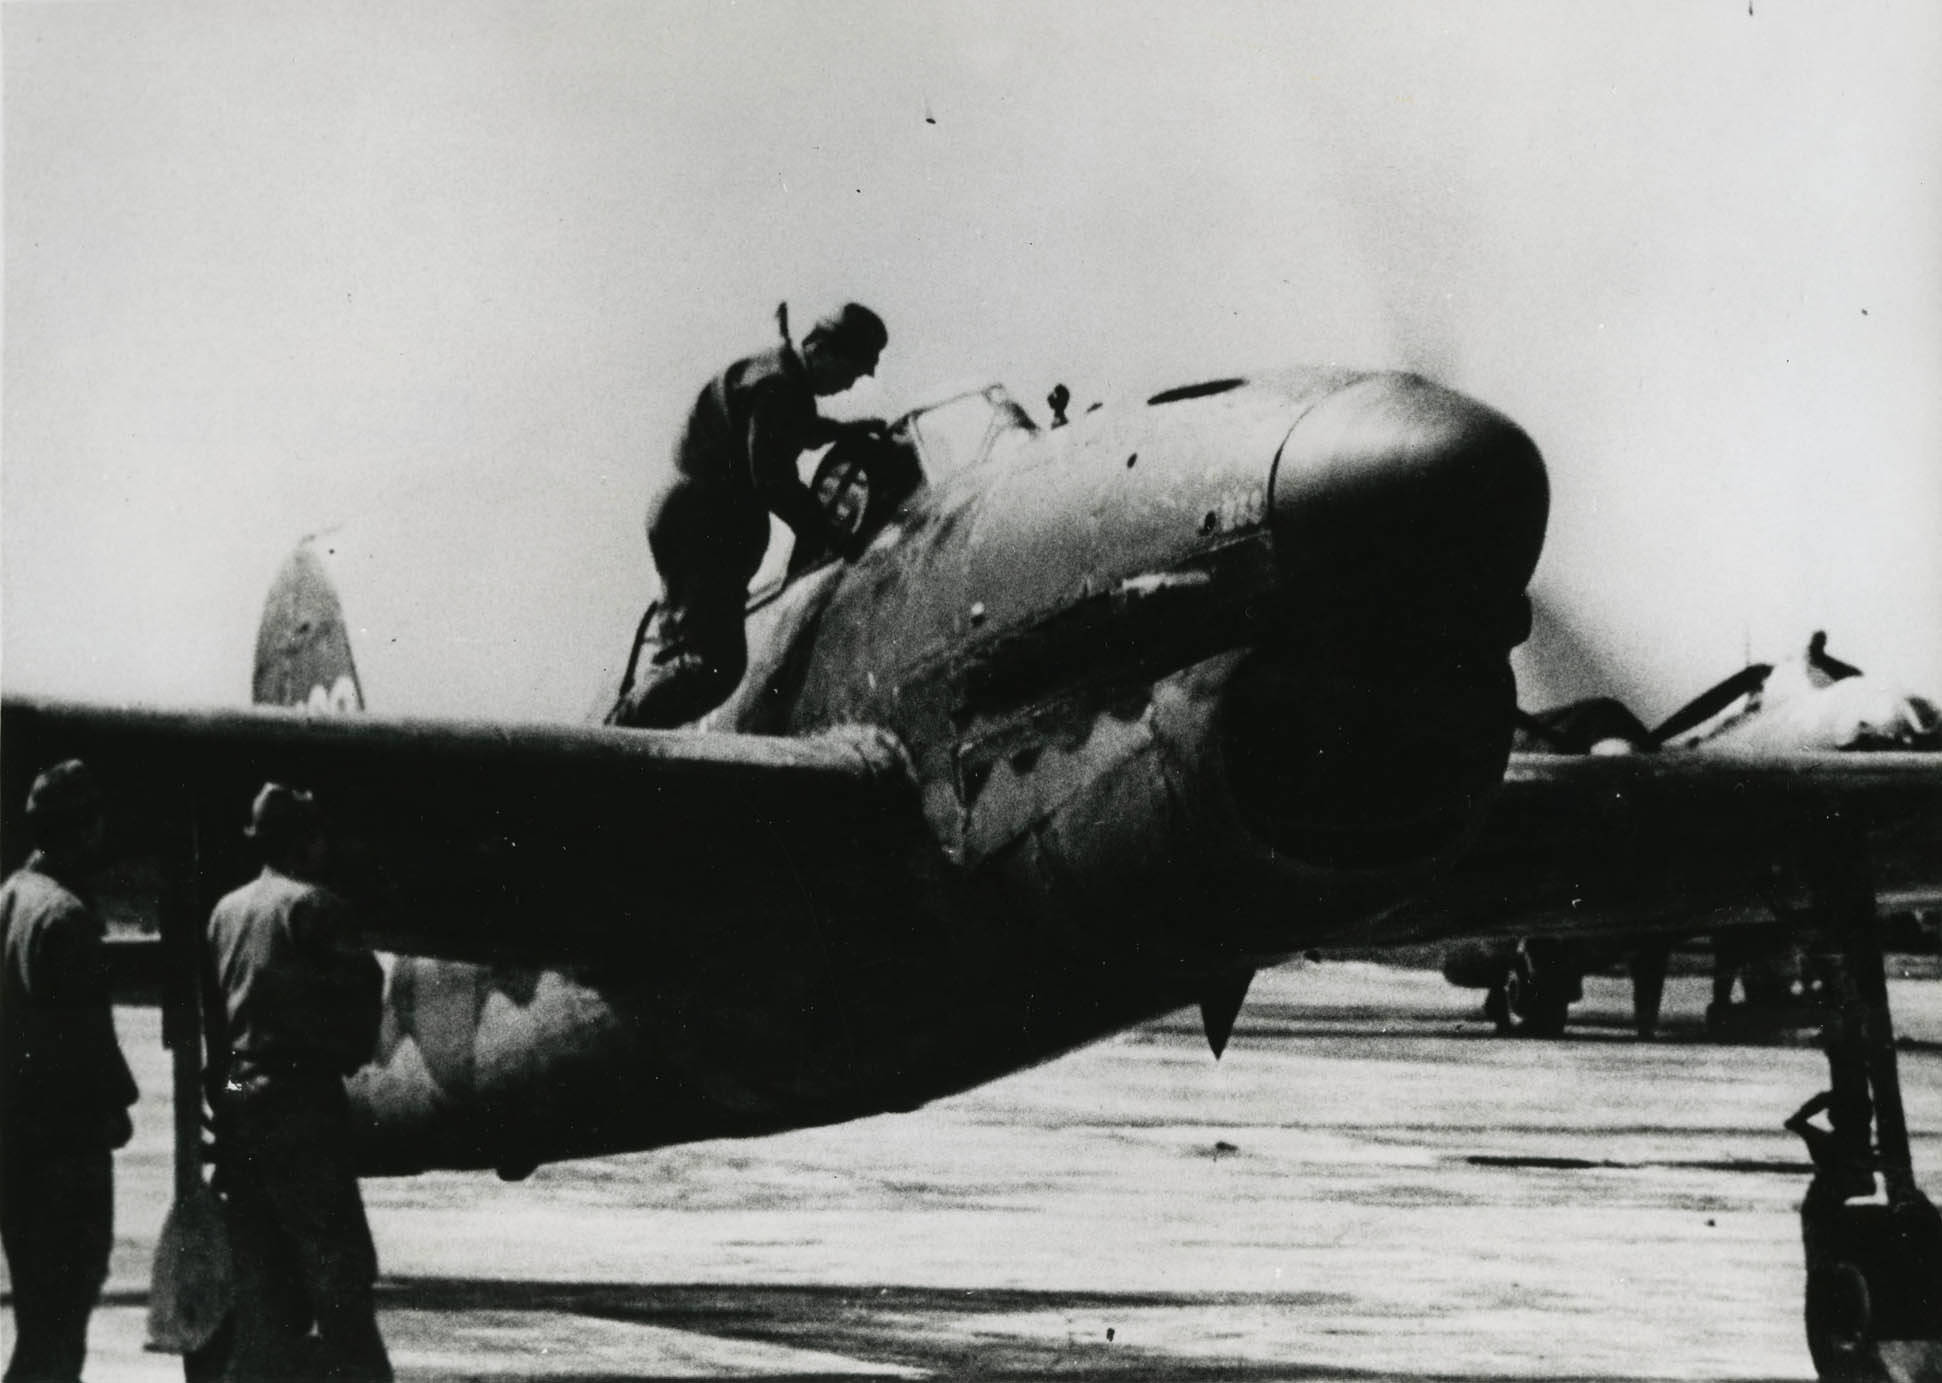 Crews making ready a D4Y-2 Suisei attack bomber, 1943-45, location unknown. The Allied code name for the D4Y was “Judy.”